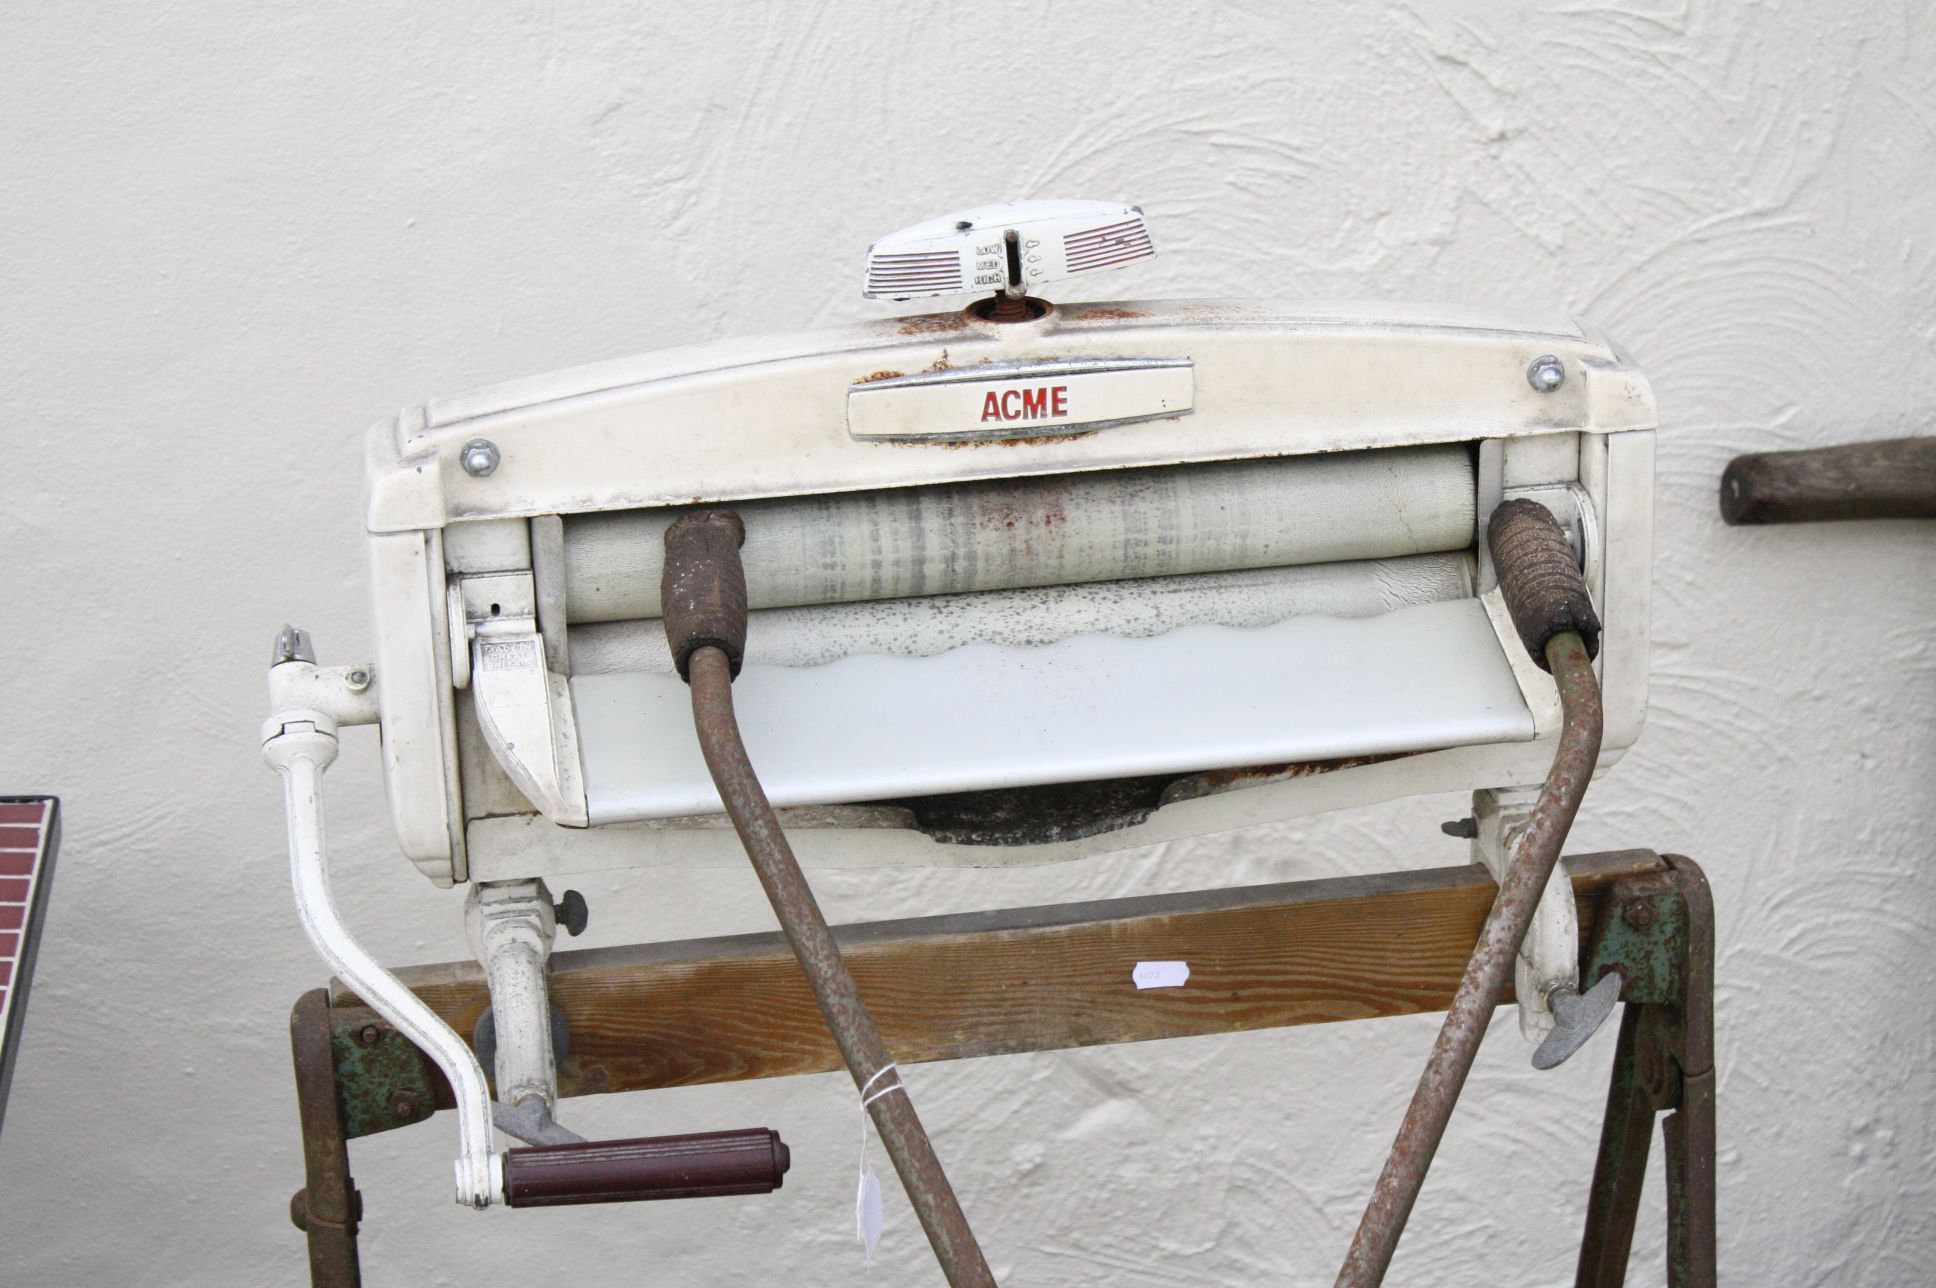 Mid 20th century ' Acme ' Mangle together with a Vintage Push-along Lawn Mowver - Image 3 of 3